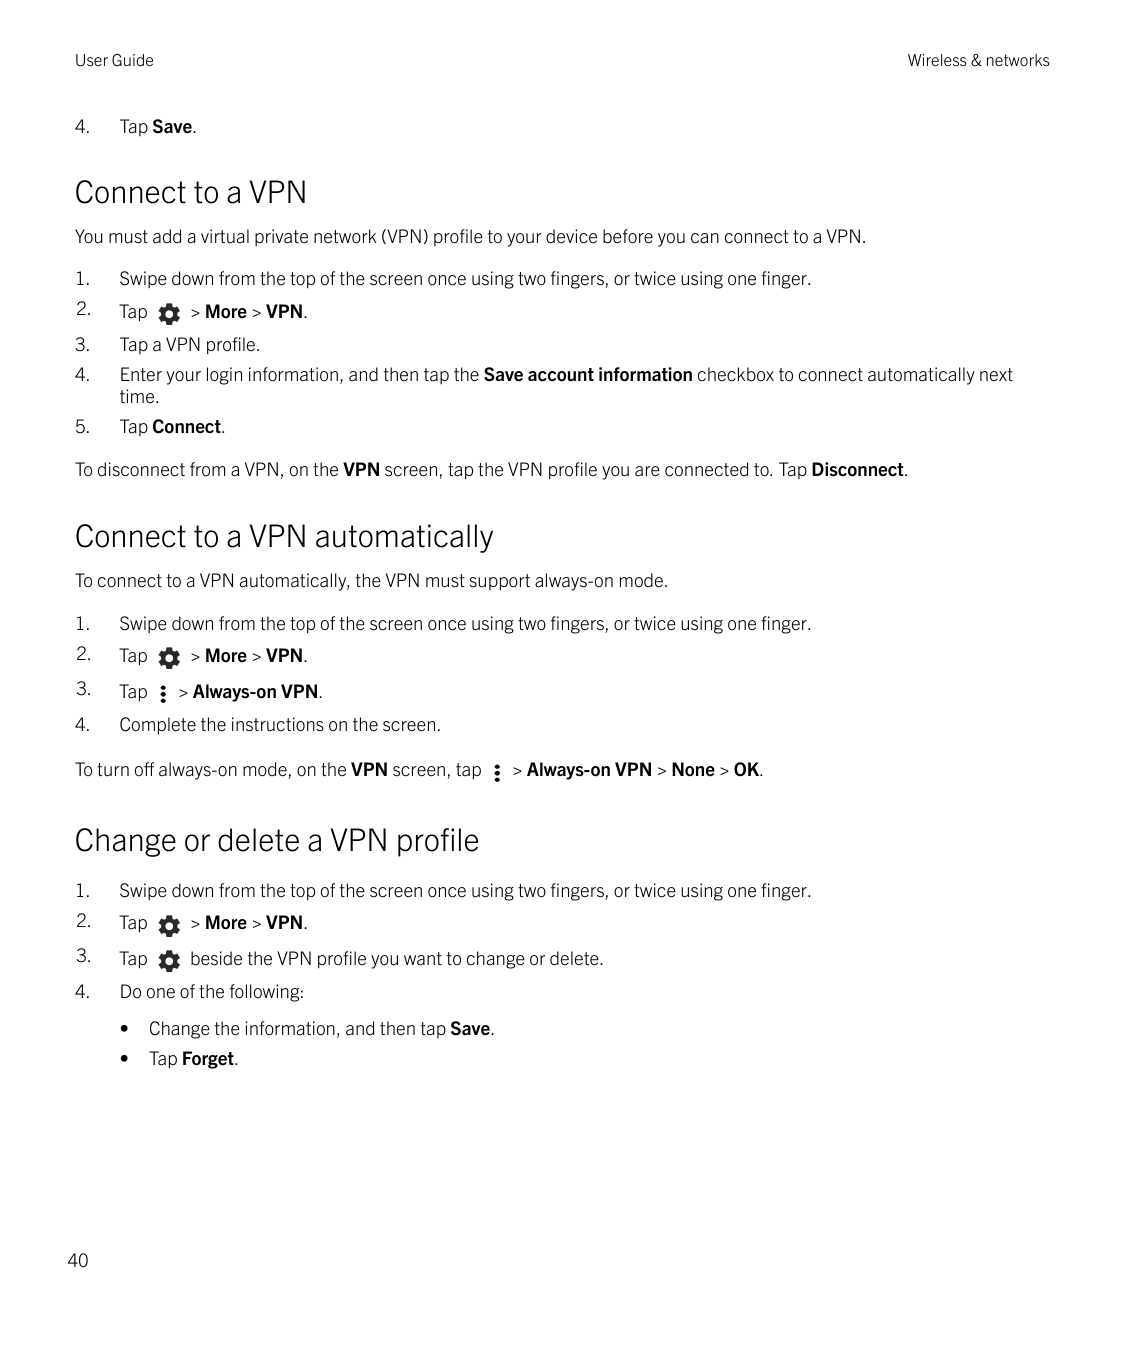 User Guide4.Wireless & networksTap Save.Connect to a VPNYou must add a virtual private network (VPN) profile to your device befo